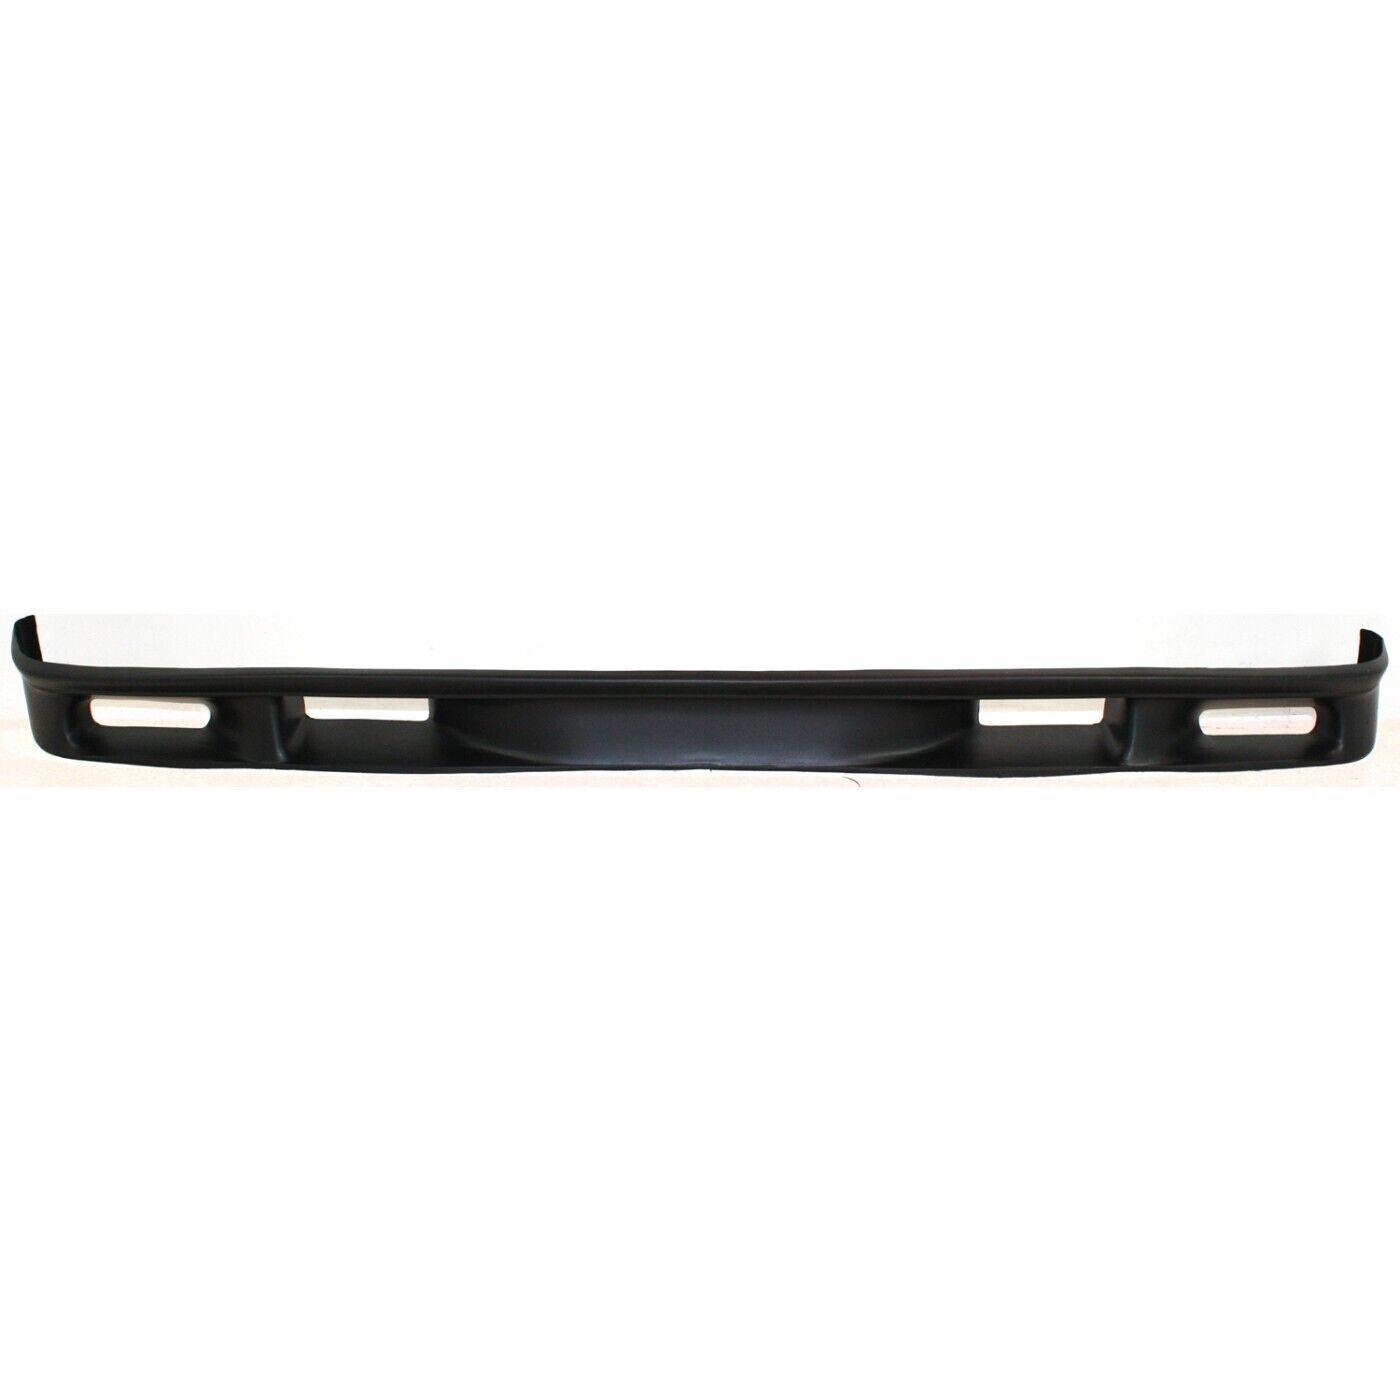 Front Bumper Valance For 1993 1994 1995 Ford F-150 Lightning With Fog Light Hole